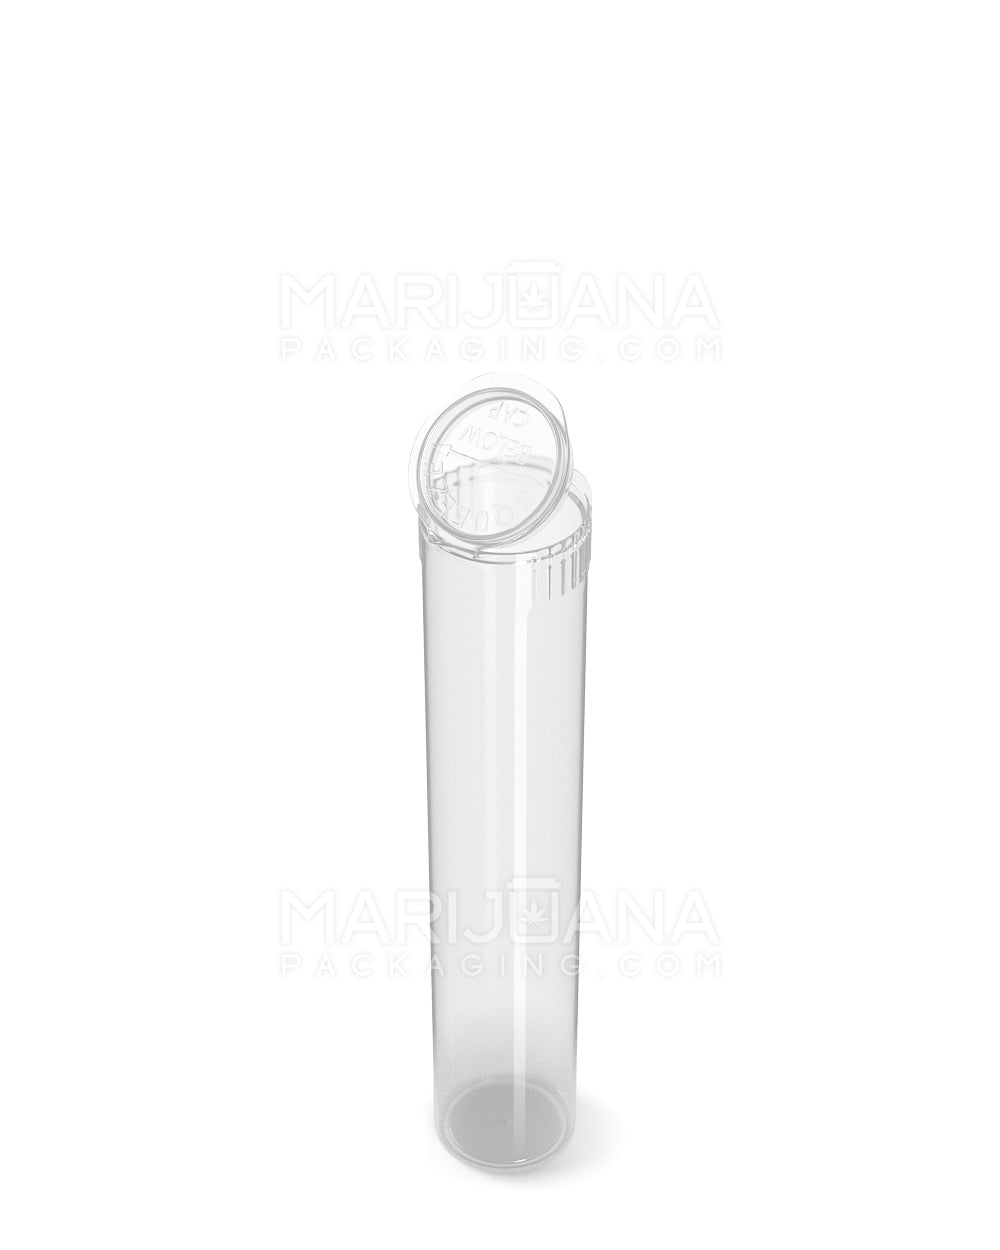 Child Resistant | Pop Top Plastic Pre-Roll Tubes | 98mm - Clear - 1000 Count - 4